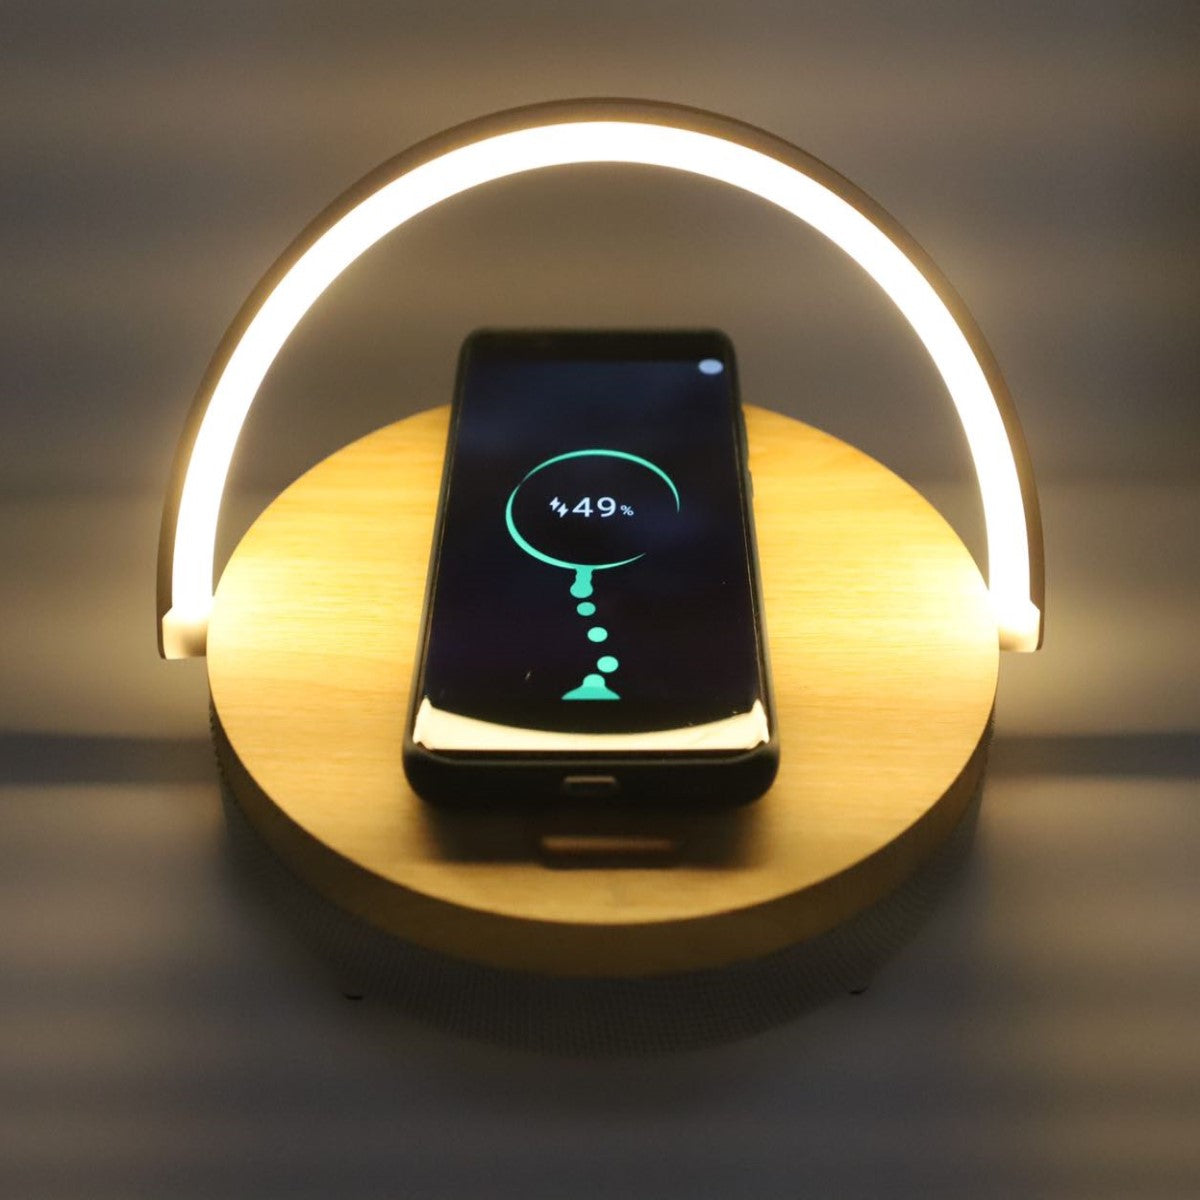 3-in-1 Portable LED Lamp with Bluetooth Speaker & Wireless Charger- Grey